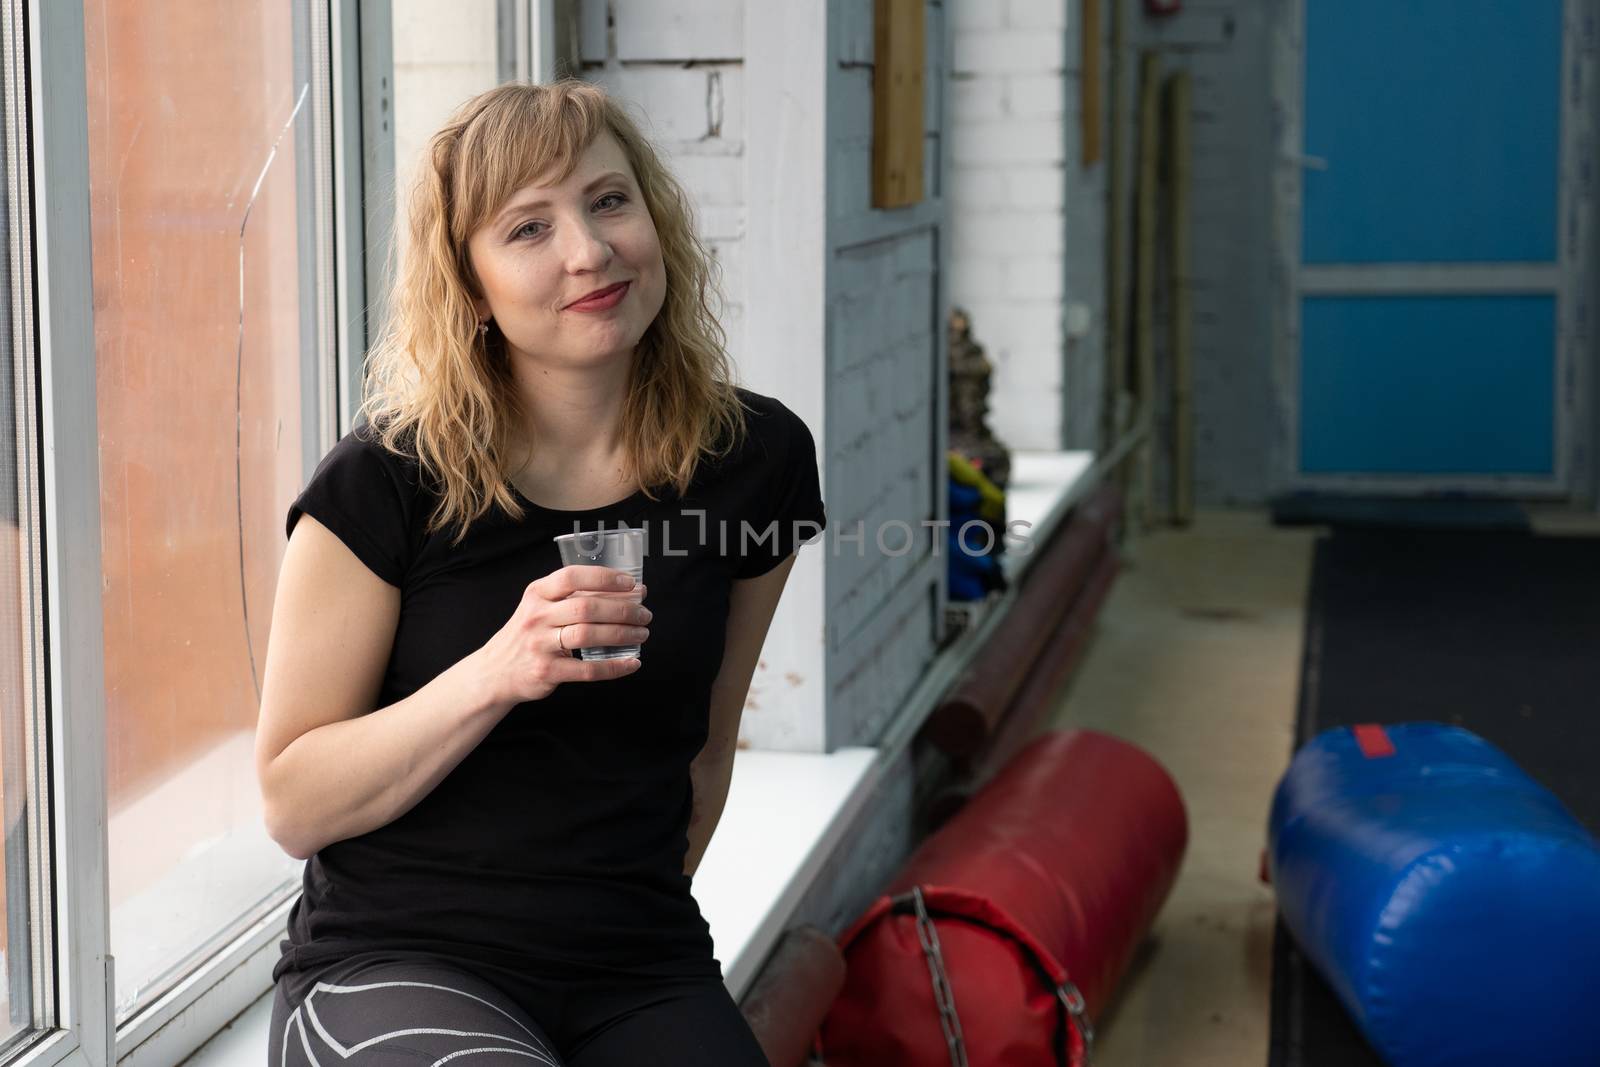 30-year-old woman with blond hair sits on a window sill against a window after a workout with a glass of water